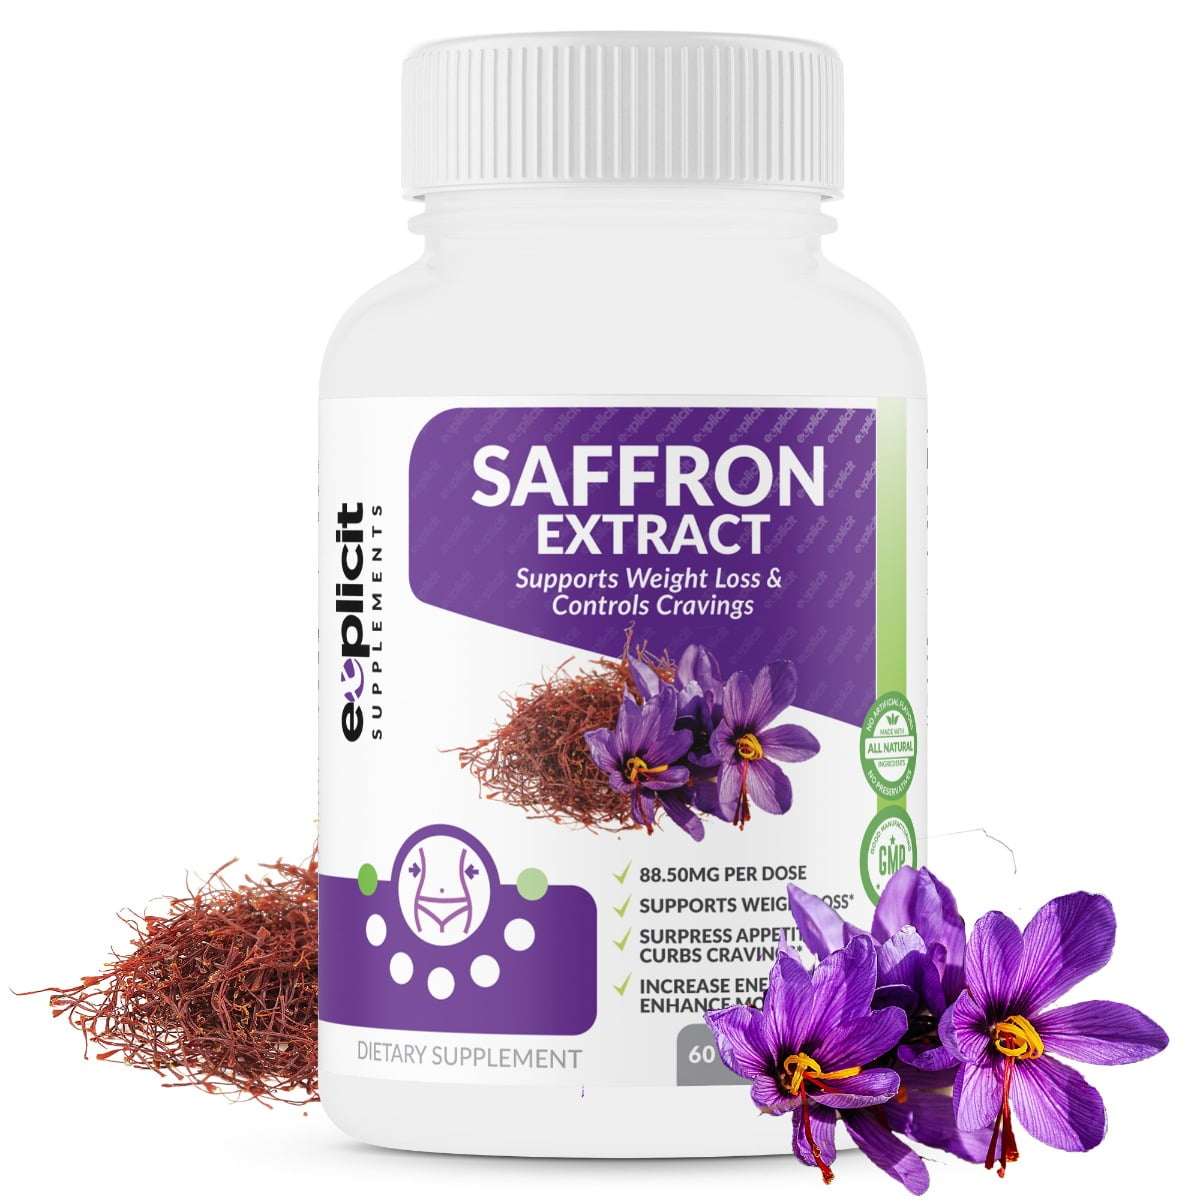 Saffron Extract – Great Natural Appetite Suppressant, Mood Booster, Healthy Weight Loss – 88.5mg of Pure Saffron – USA Made – 60 Capsules